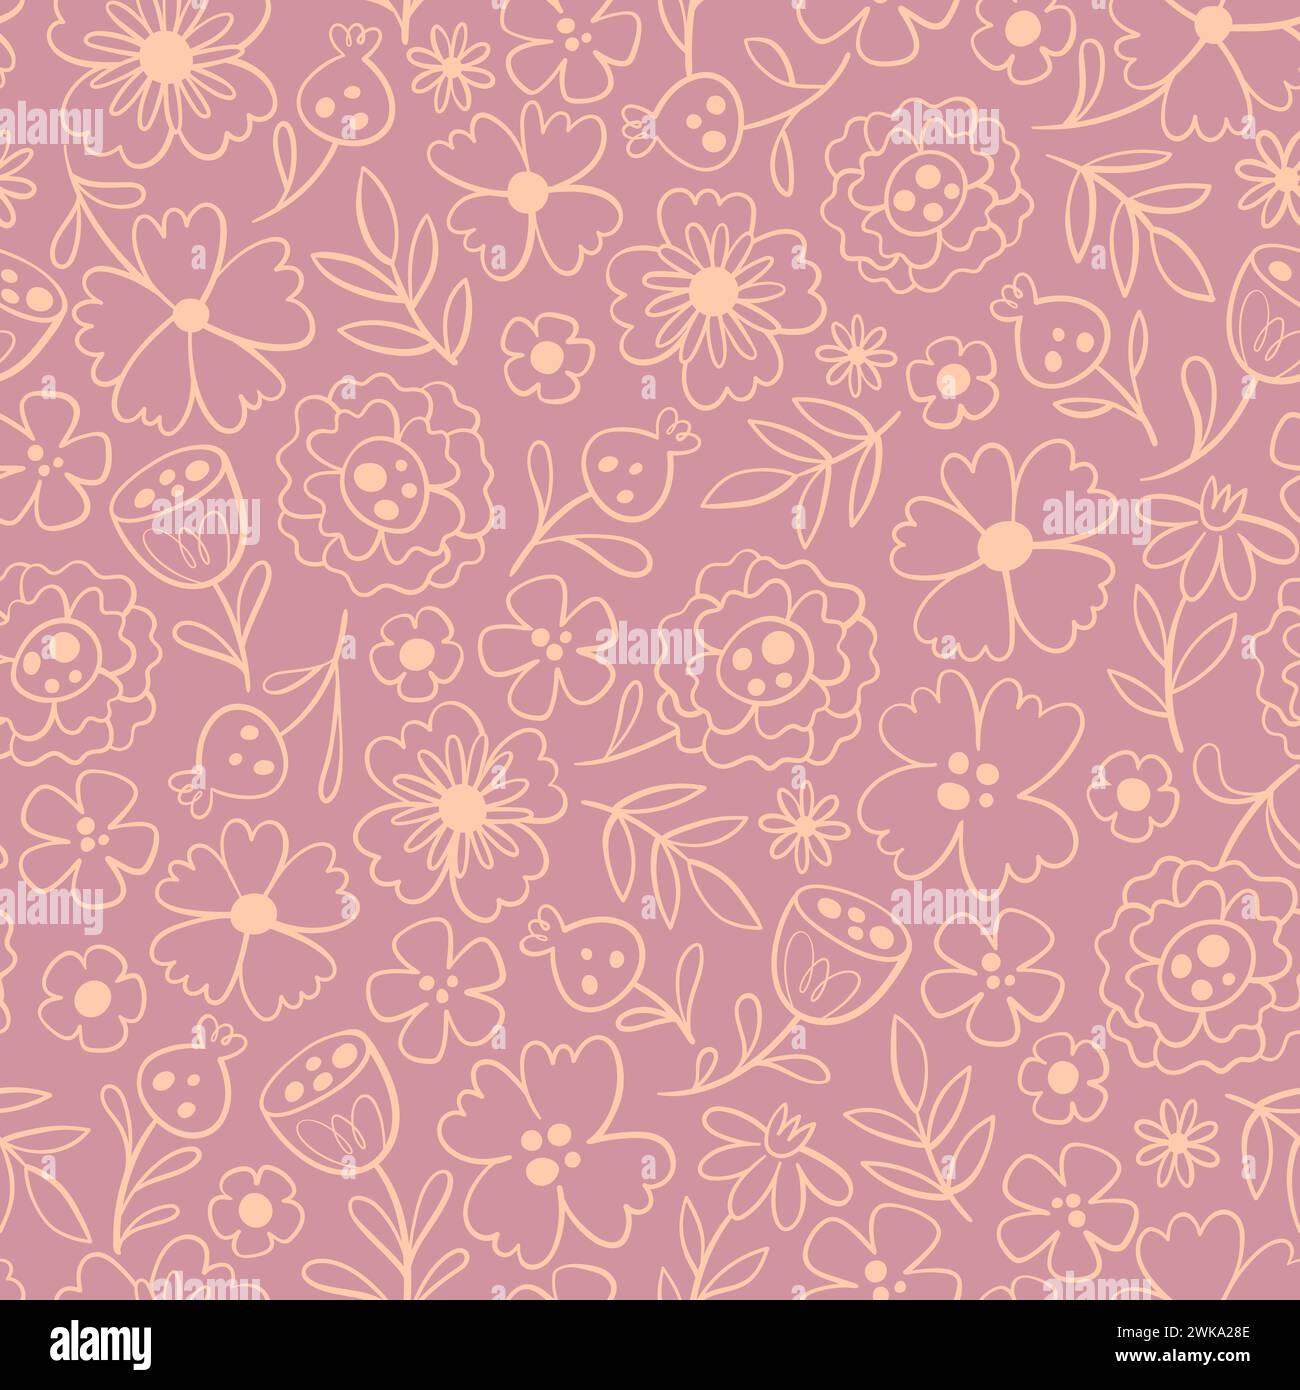 Floral seamless pattern in warm pink tones. Doodle style. Seamless pattern with line art flowers. Vector illustration. Stock Vector